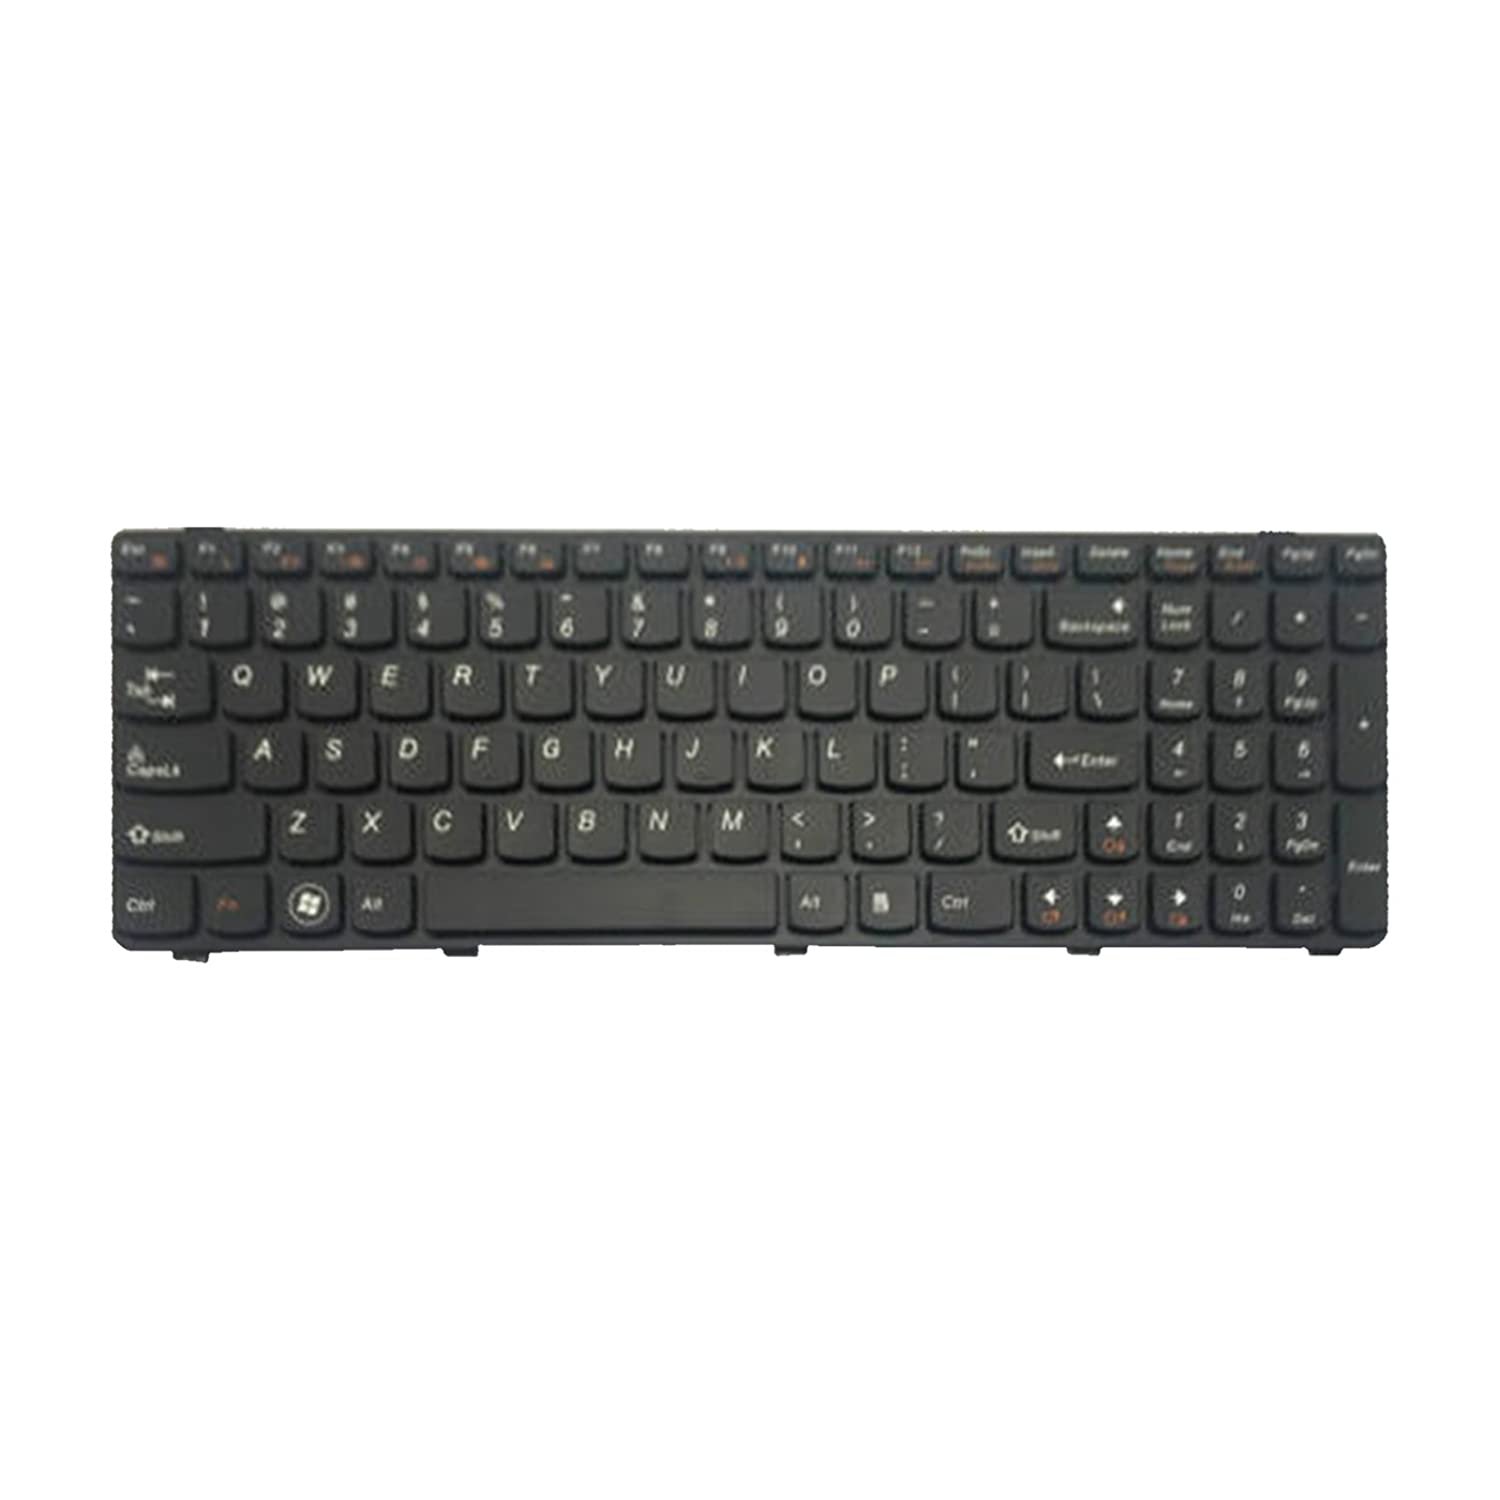 You are currently viewing MSI Laptop Keyboard at Chandivali, Mumbai